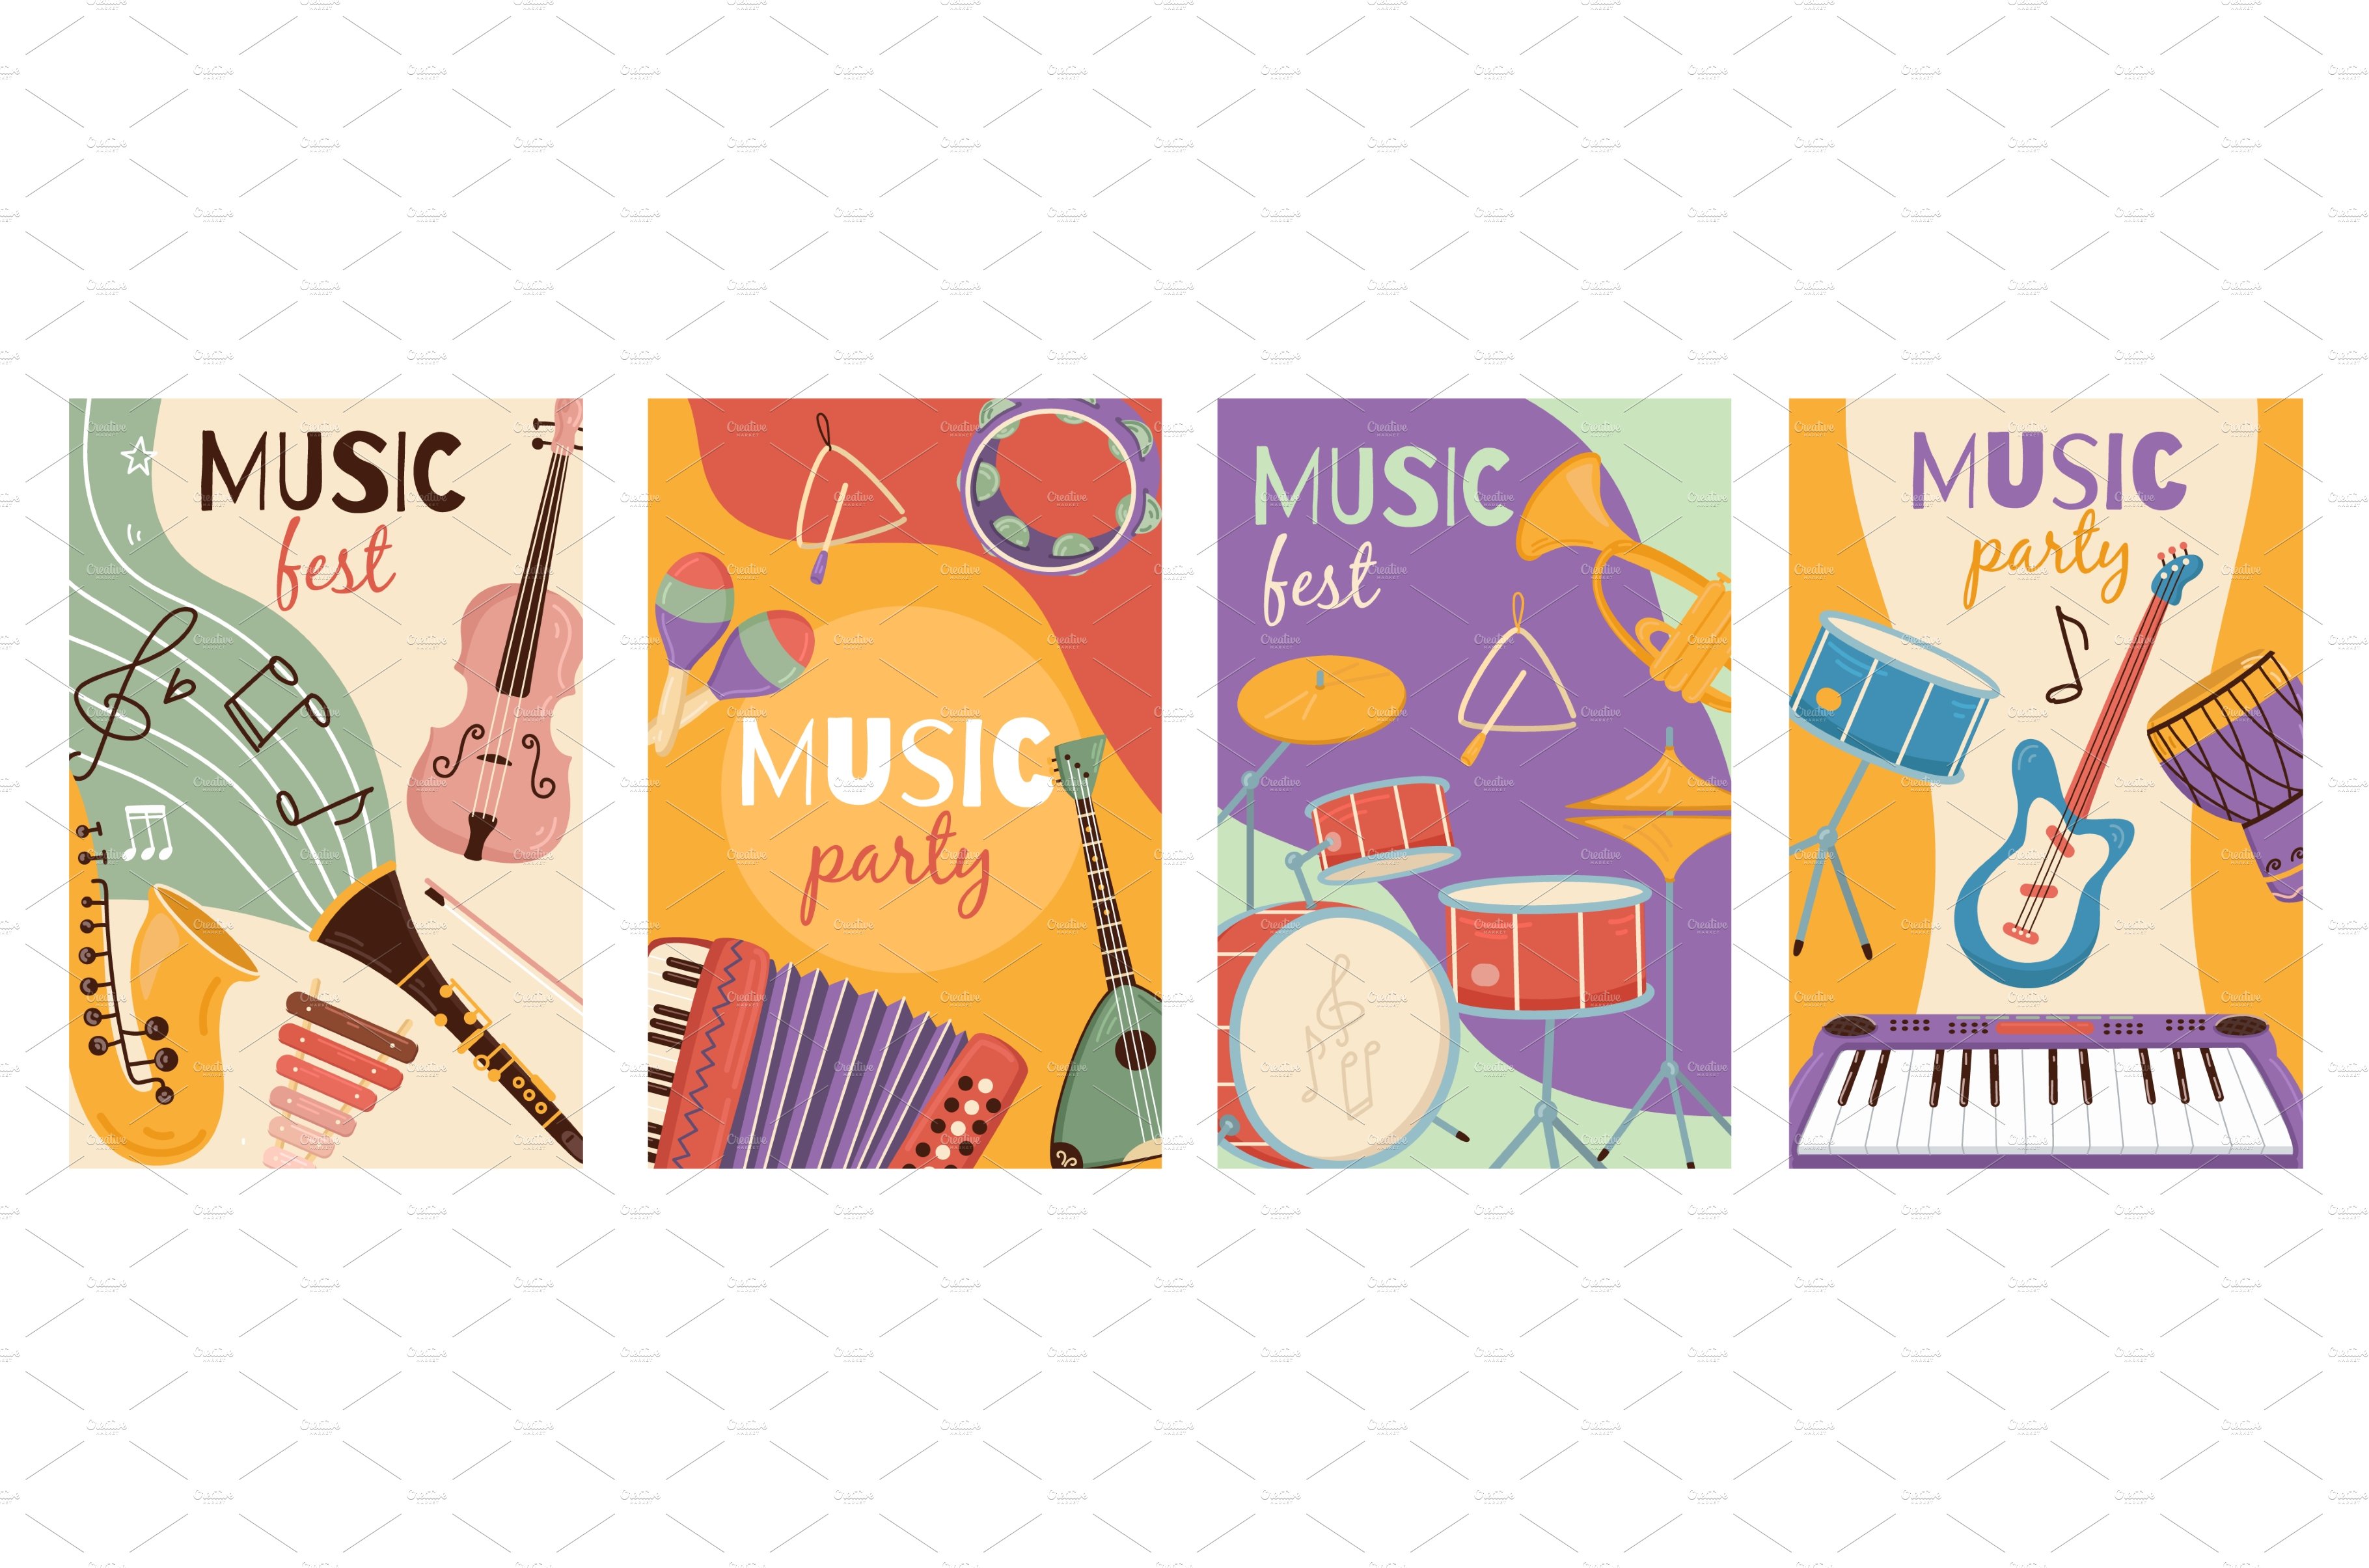 Musical instruments cards. Festivals cover image.